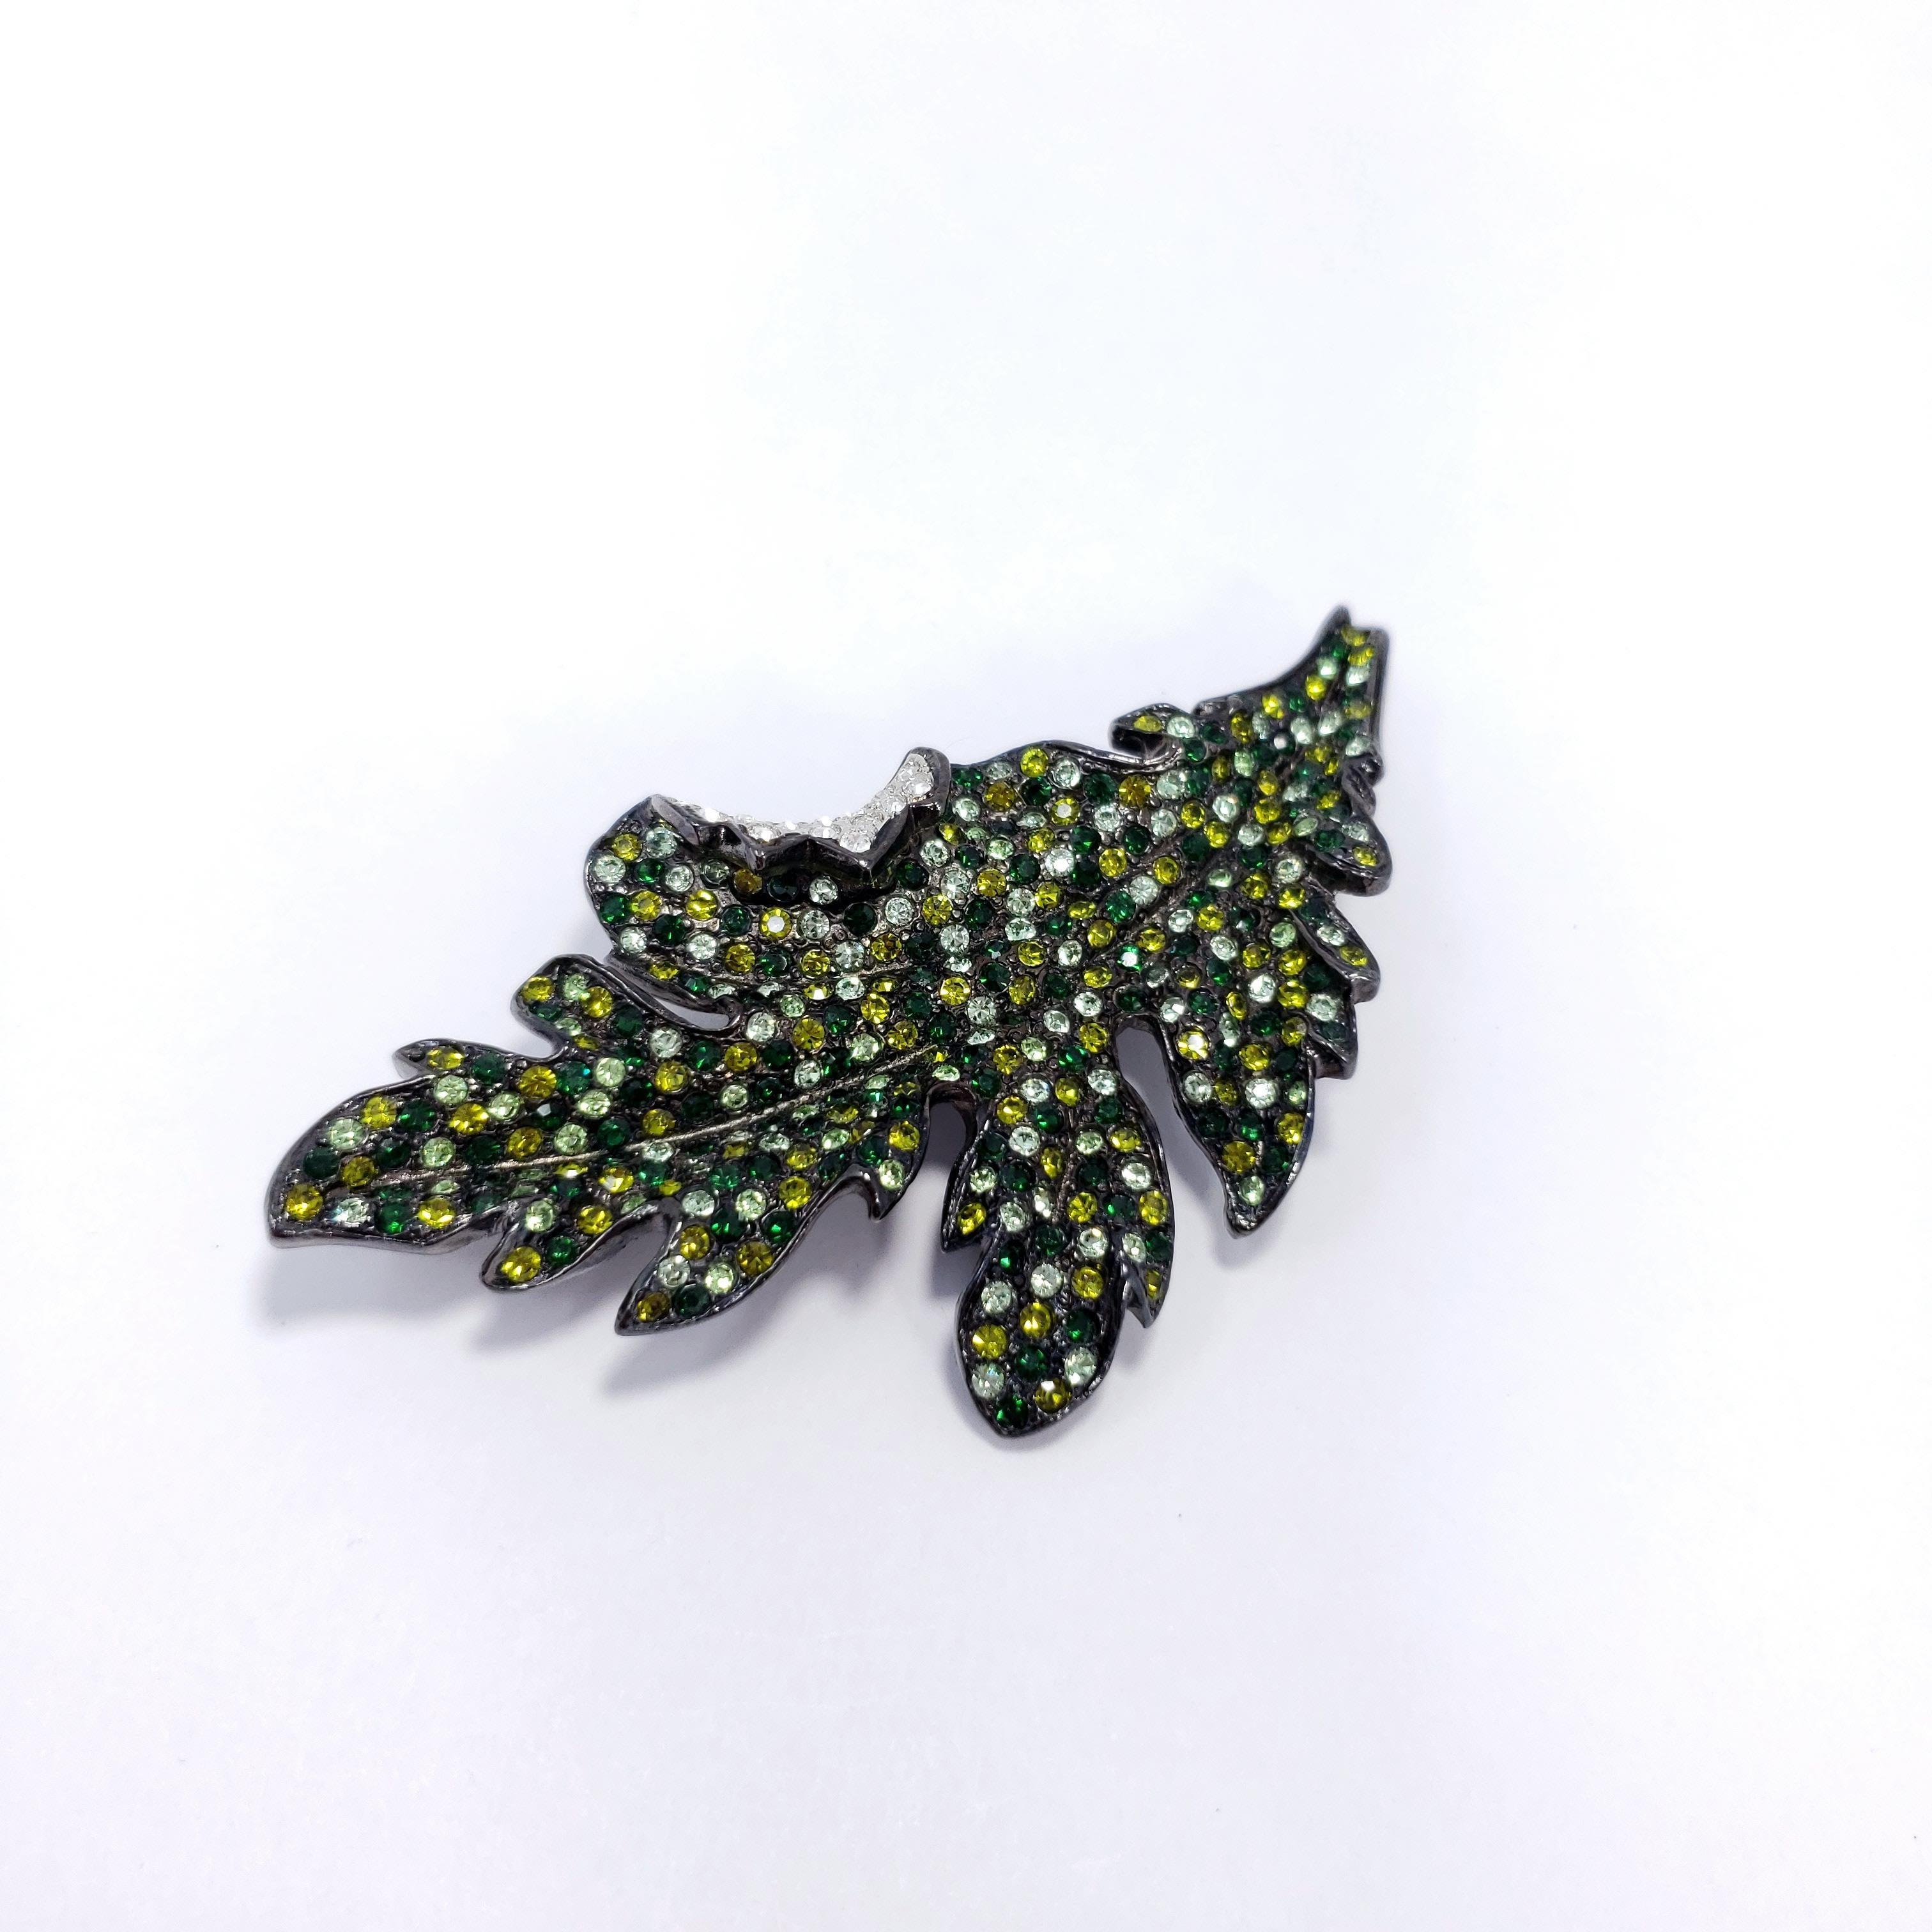 Sparkling pin brooch from Kenneth Jay Lane. This gray-gunmetal leaf is decorated with dazzling crystals in peridot, olivine, and emerald colors.

Hallmarks: Kenneth Lane